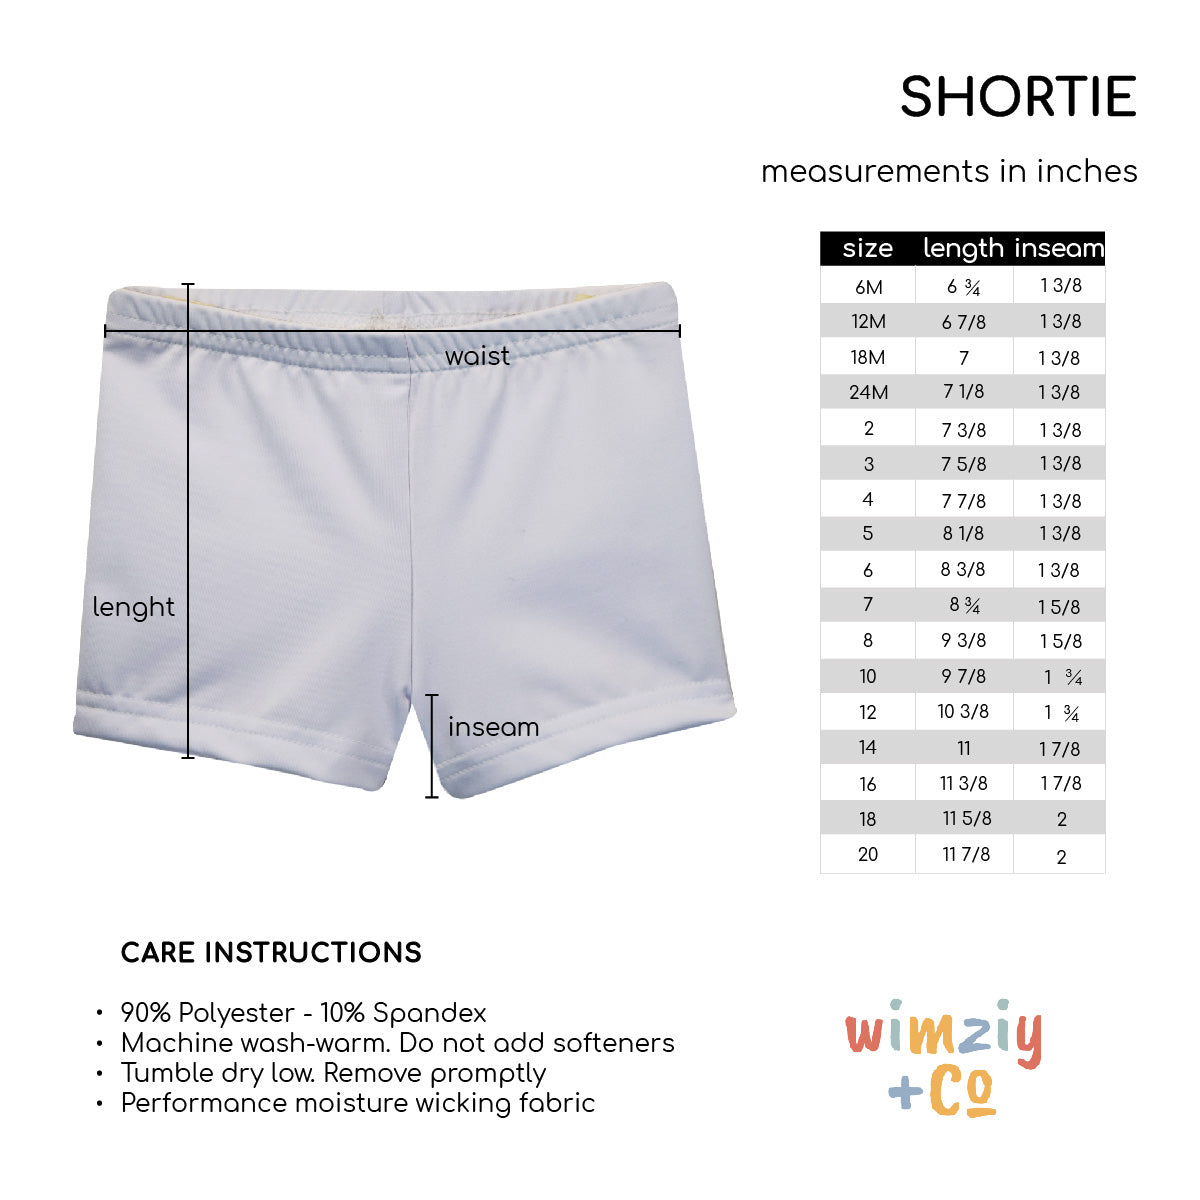 Stay Cool Shorties - Wimziy&Co.